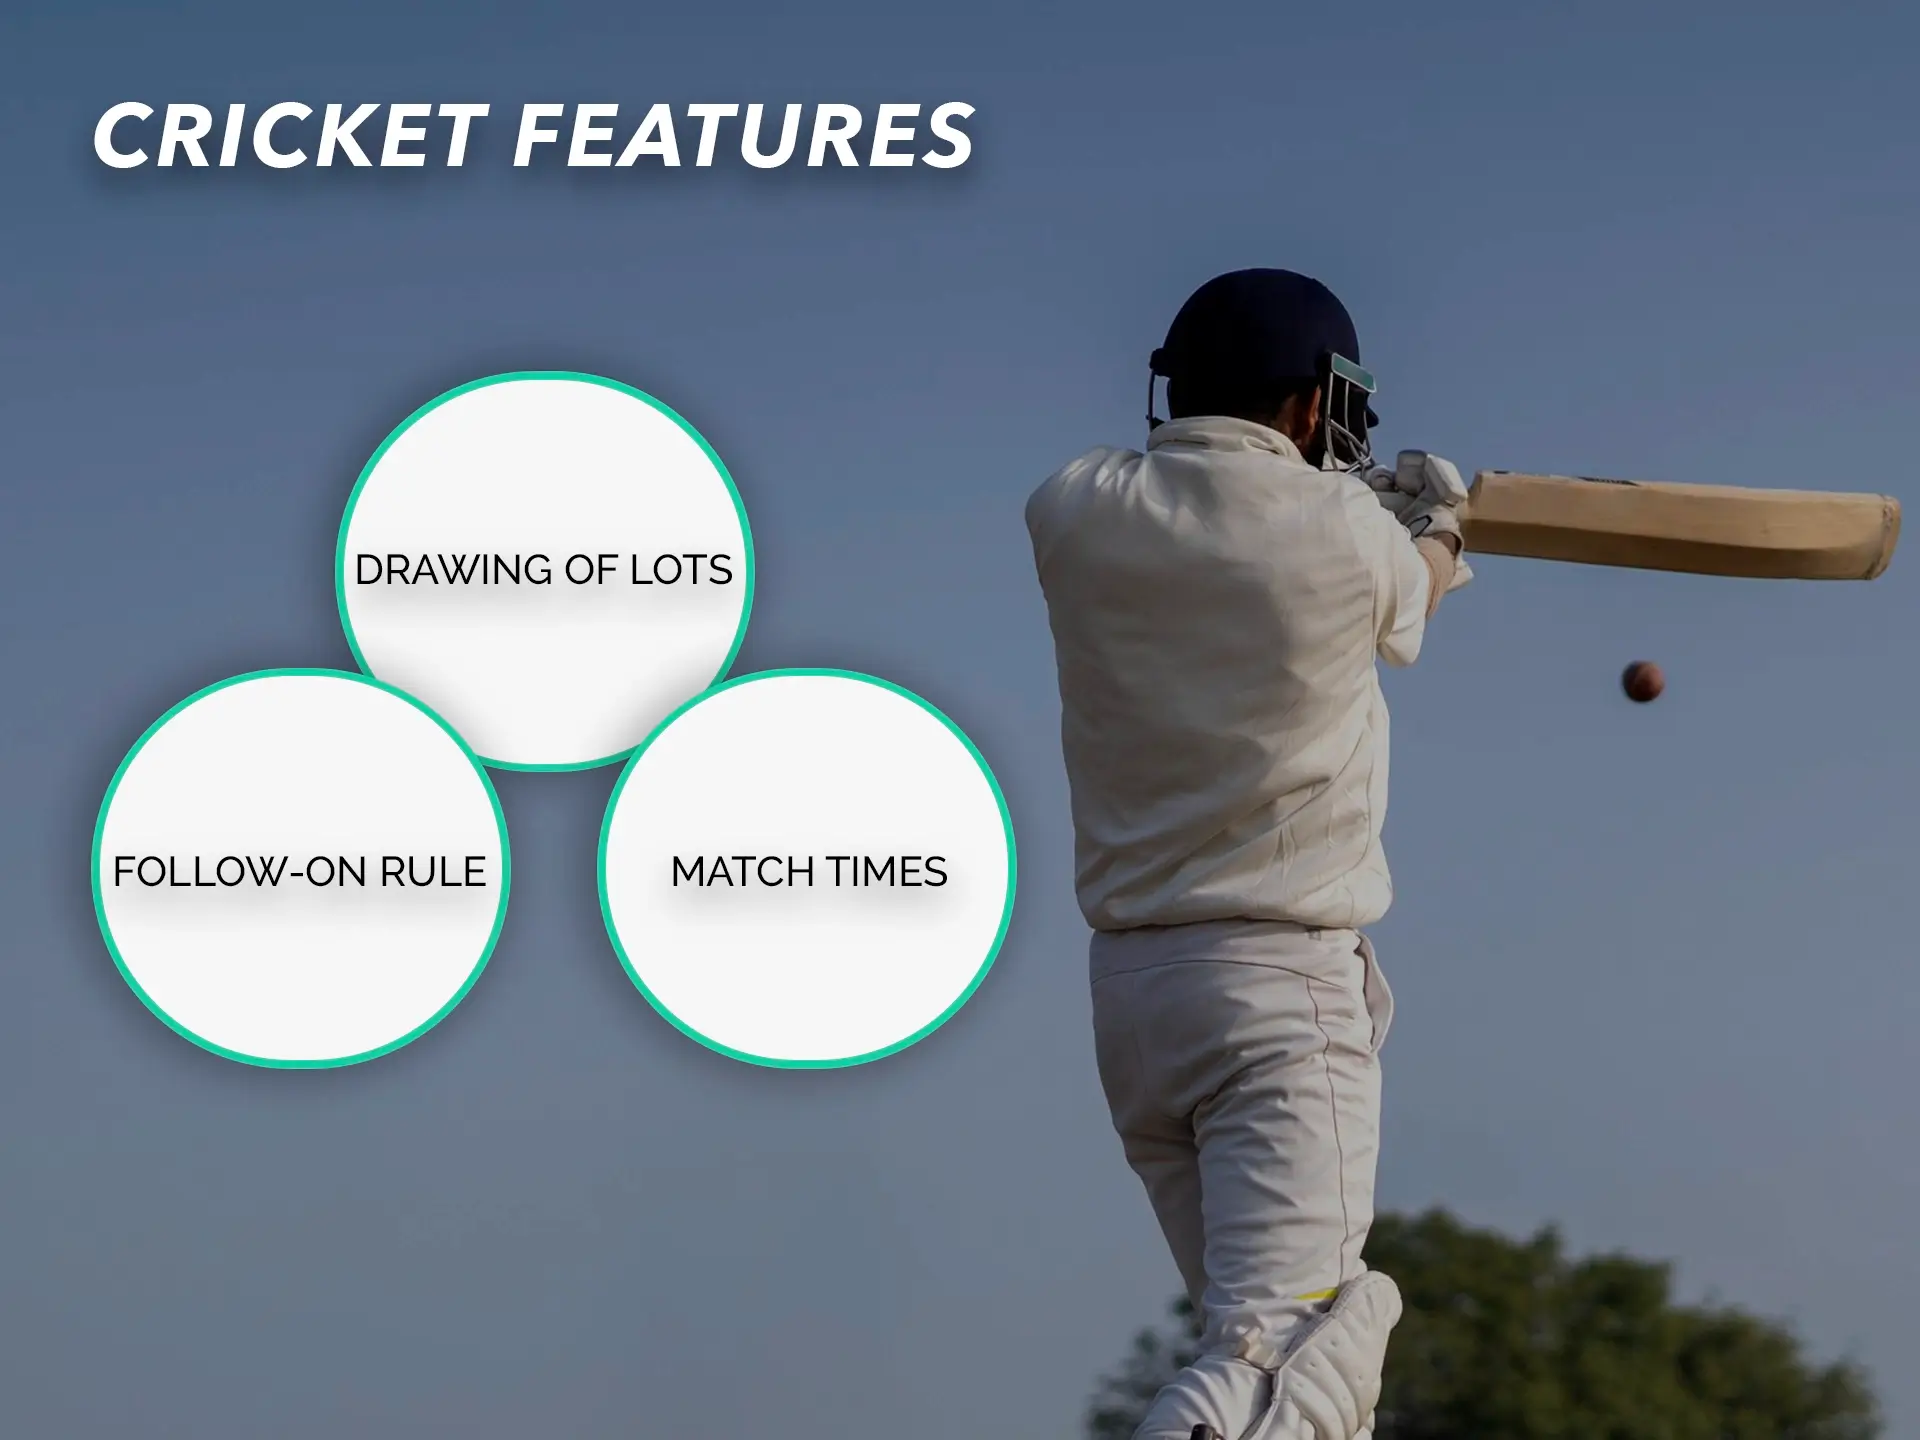 Learn the features of cricket and take advantage of them when betting.